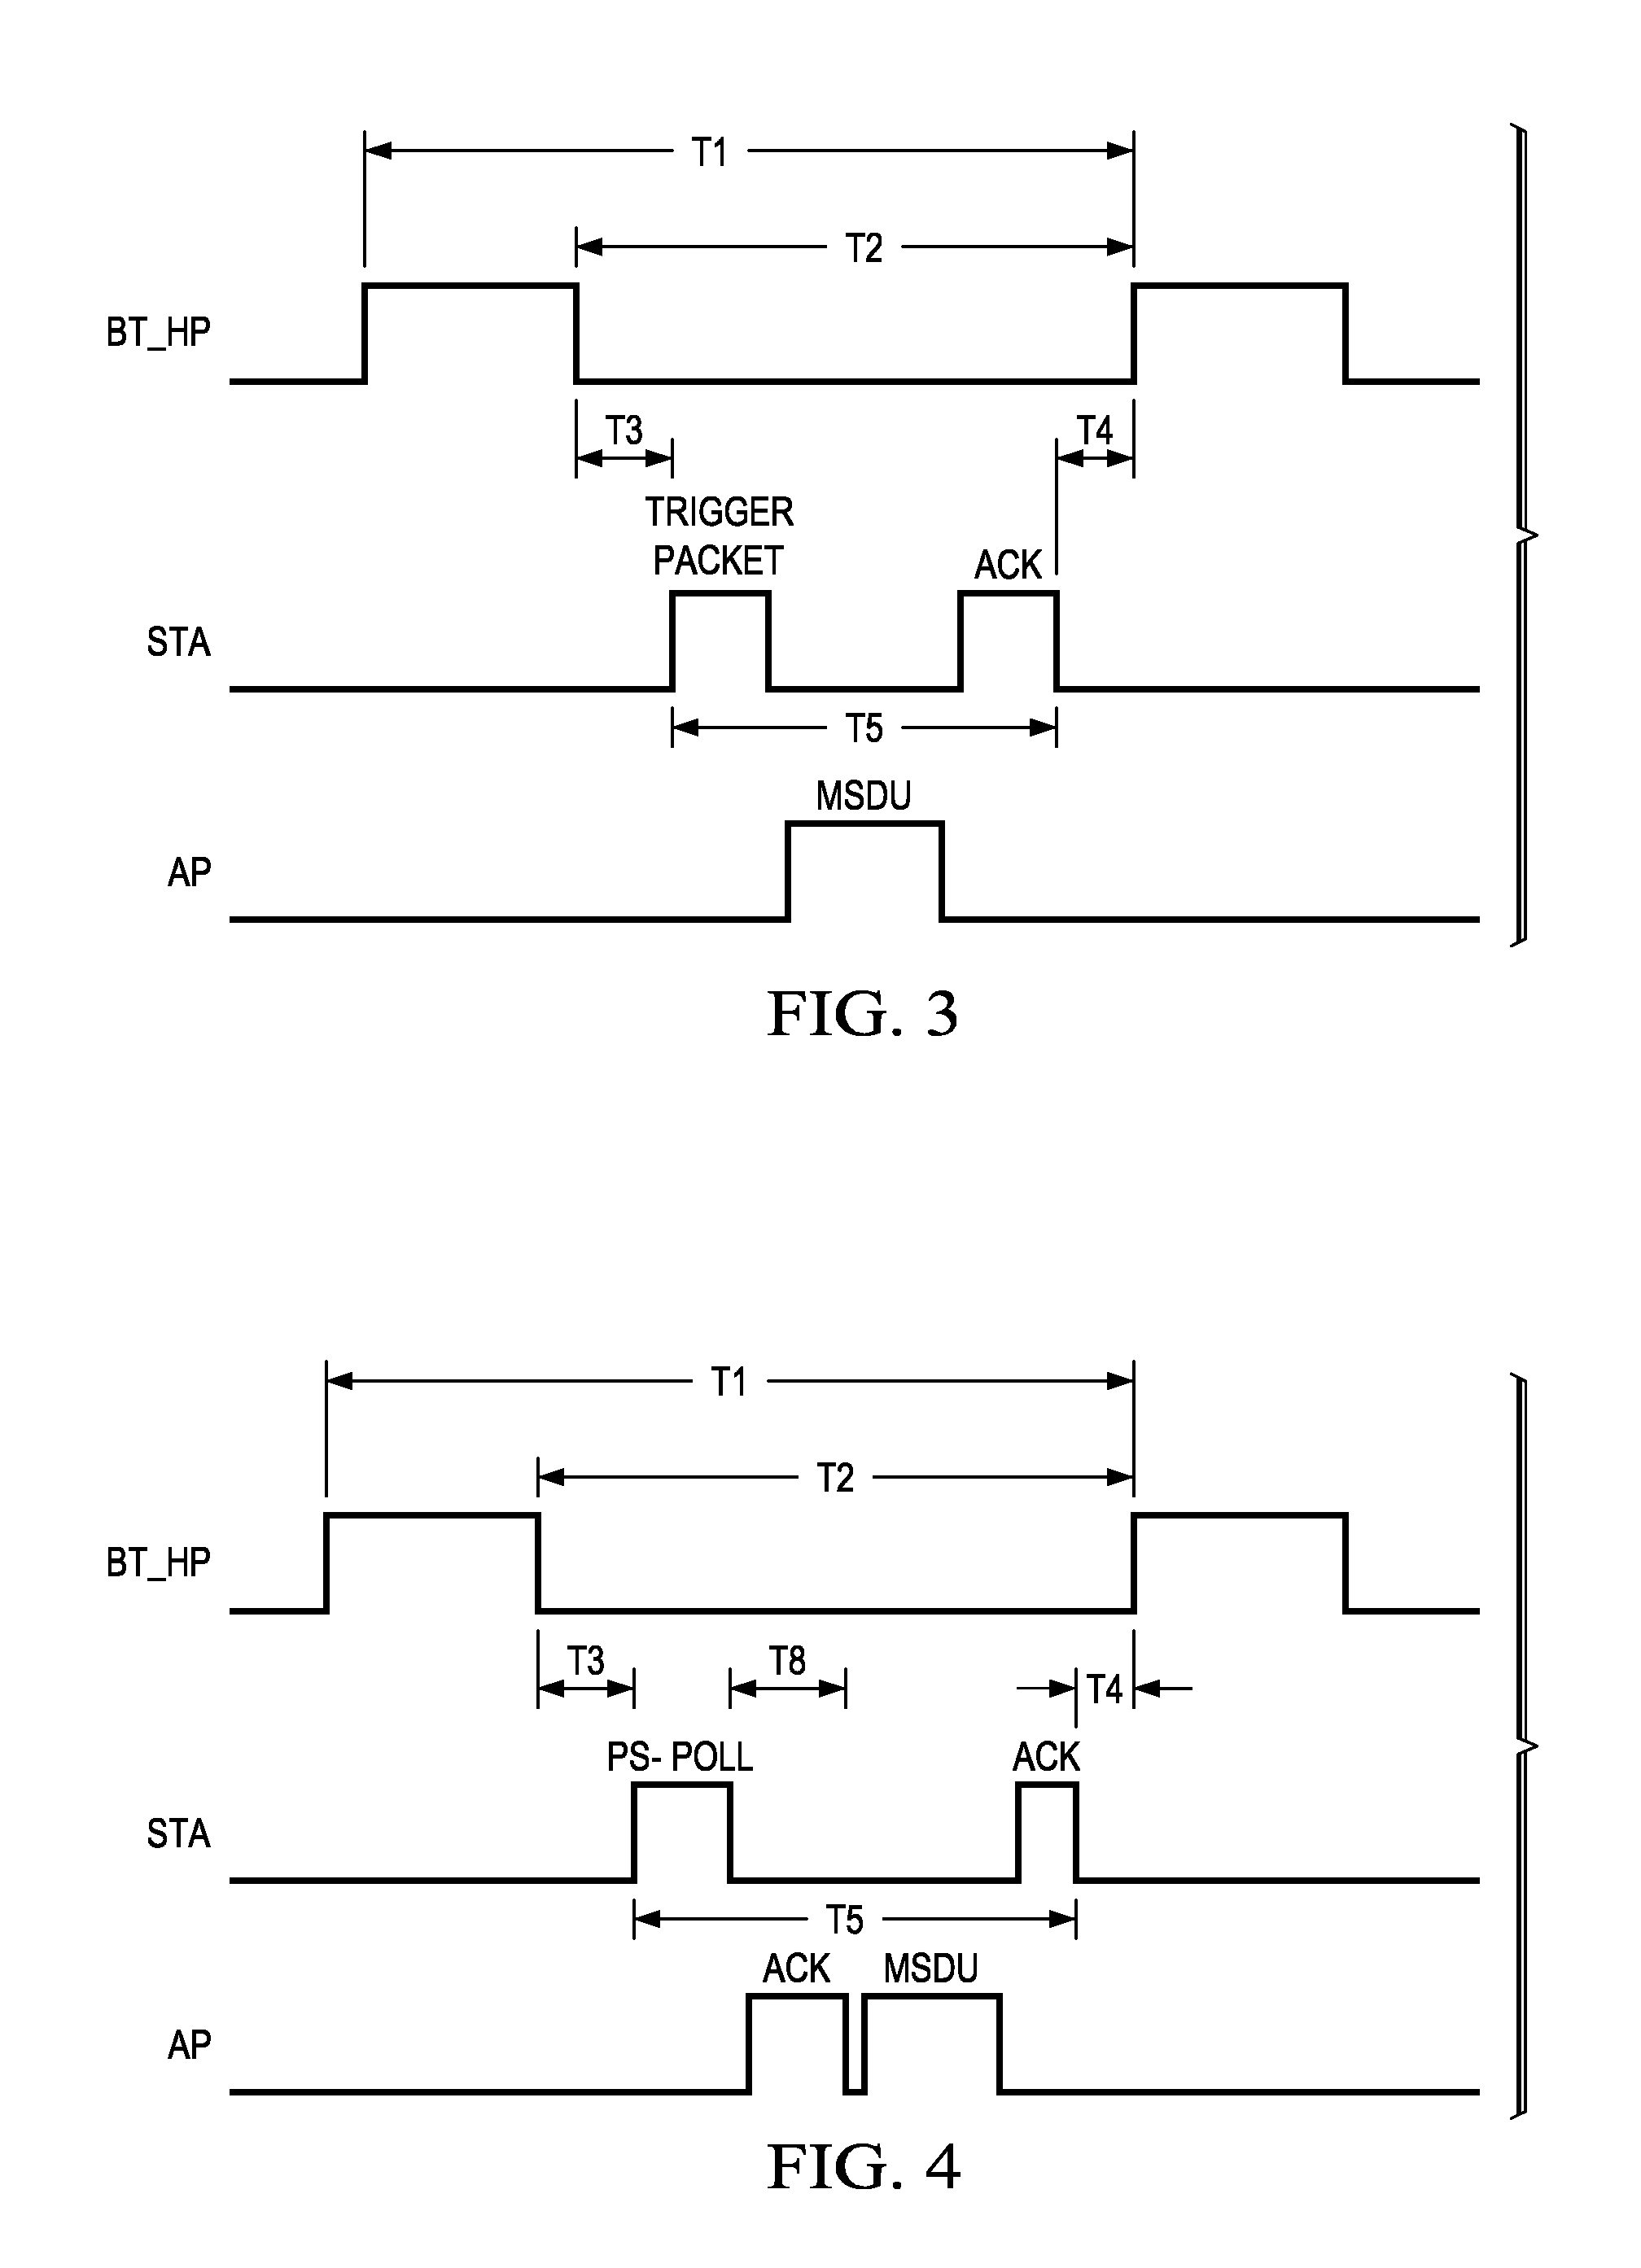 Apparatus for and method of bluetooth and wireless local area network coexistence using a single antenna in a collocated device